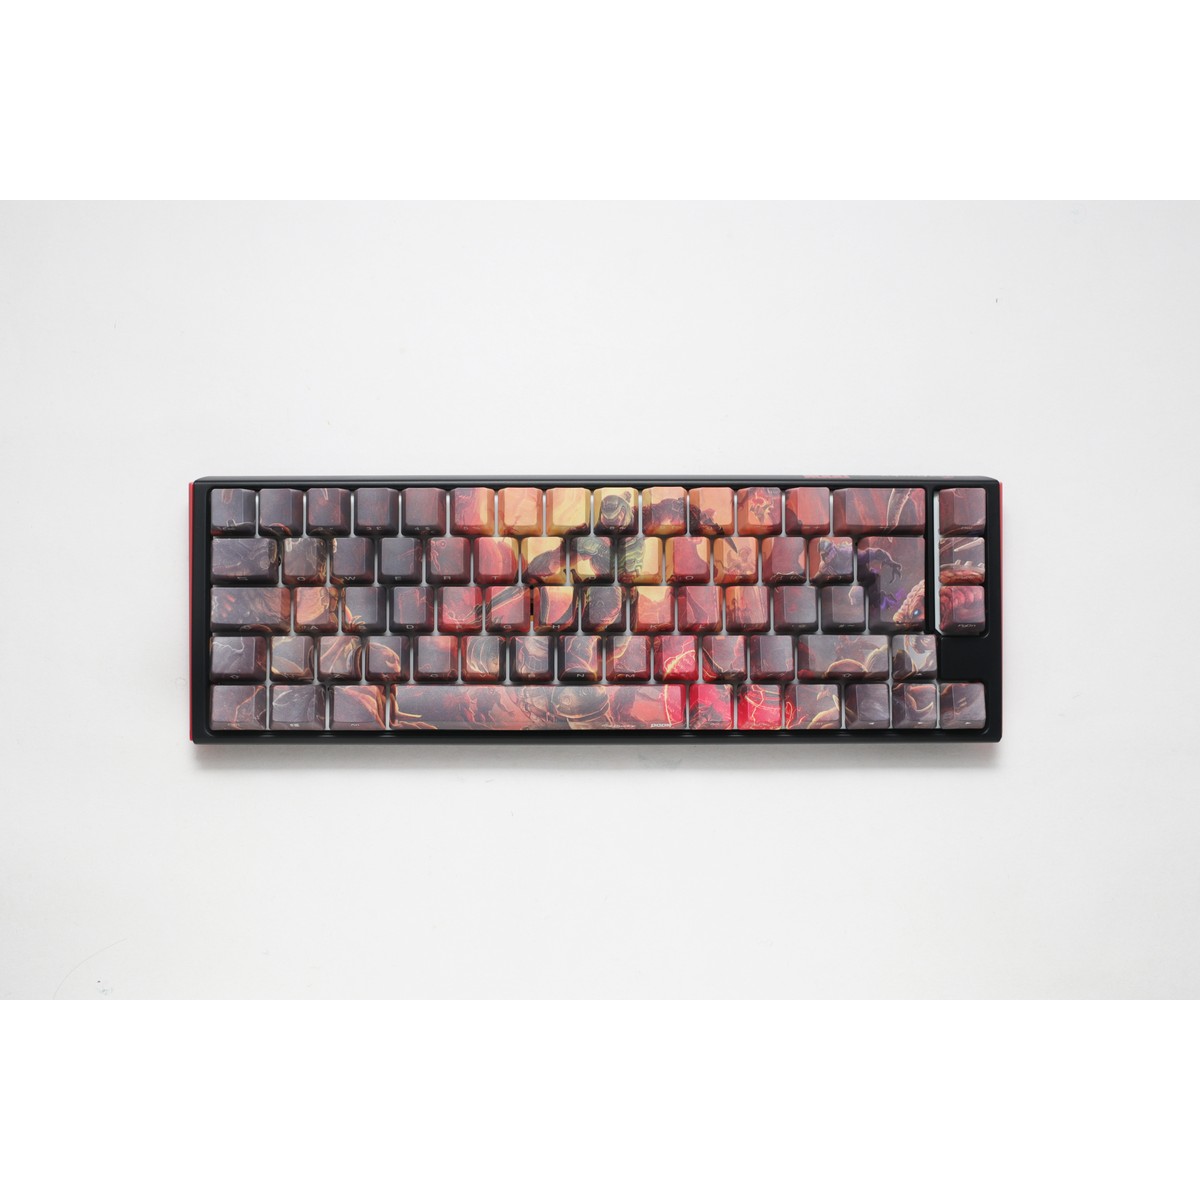 Ducky x DOOM SF 65% Gaming Keyboard Limited Edition Cherry MX Blue Switches UK L